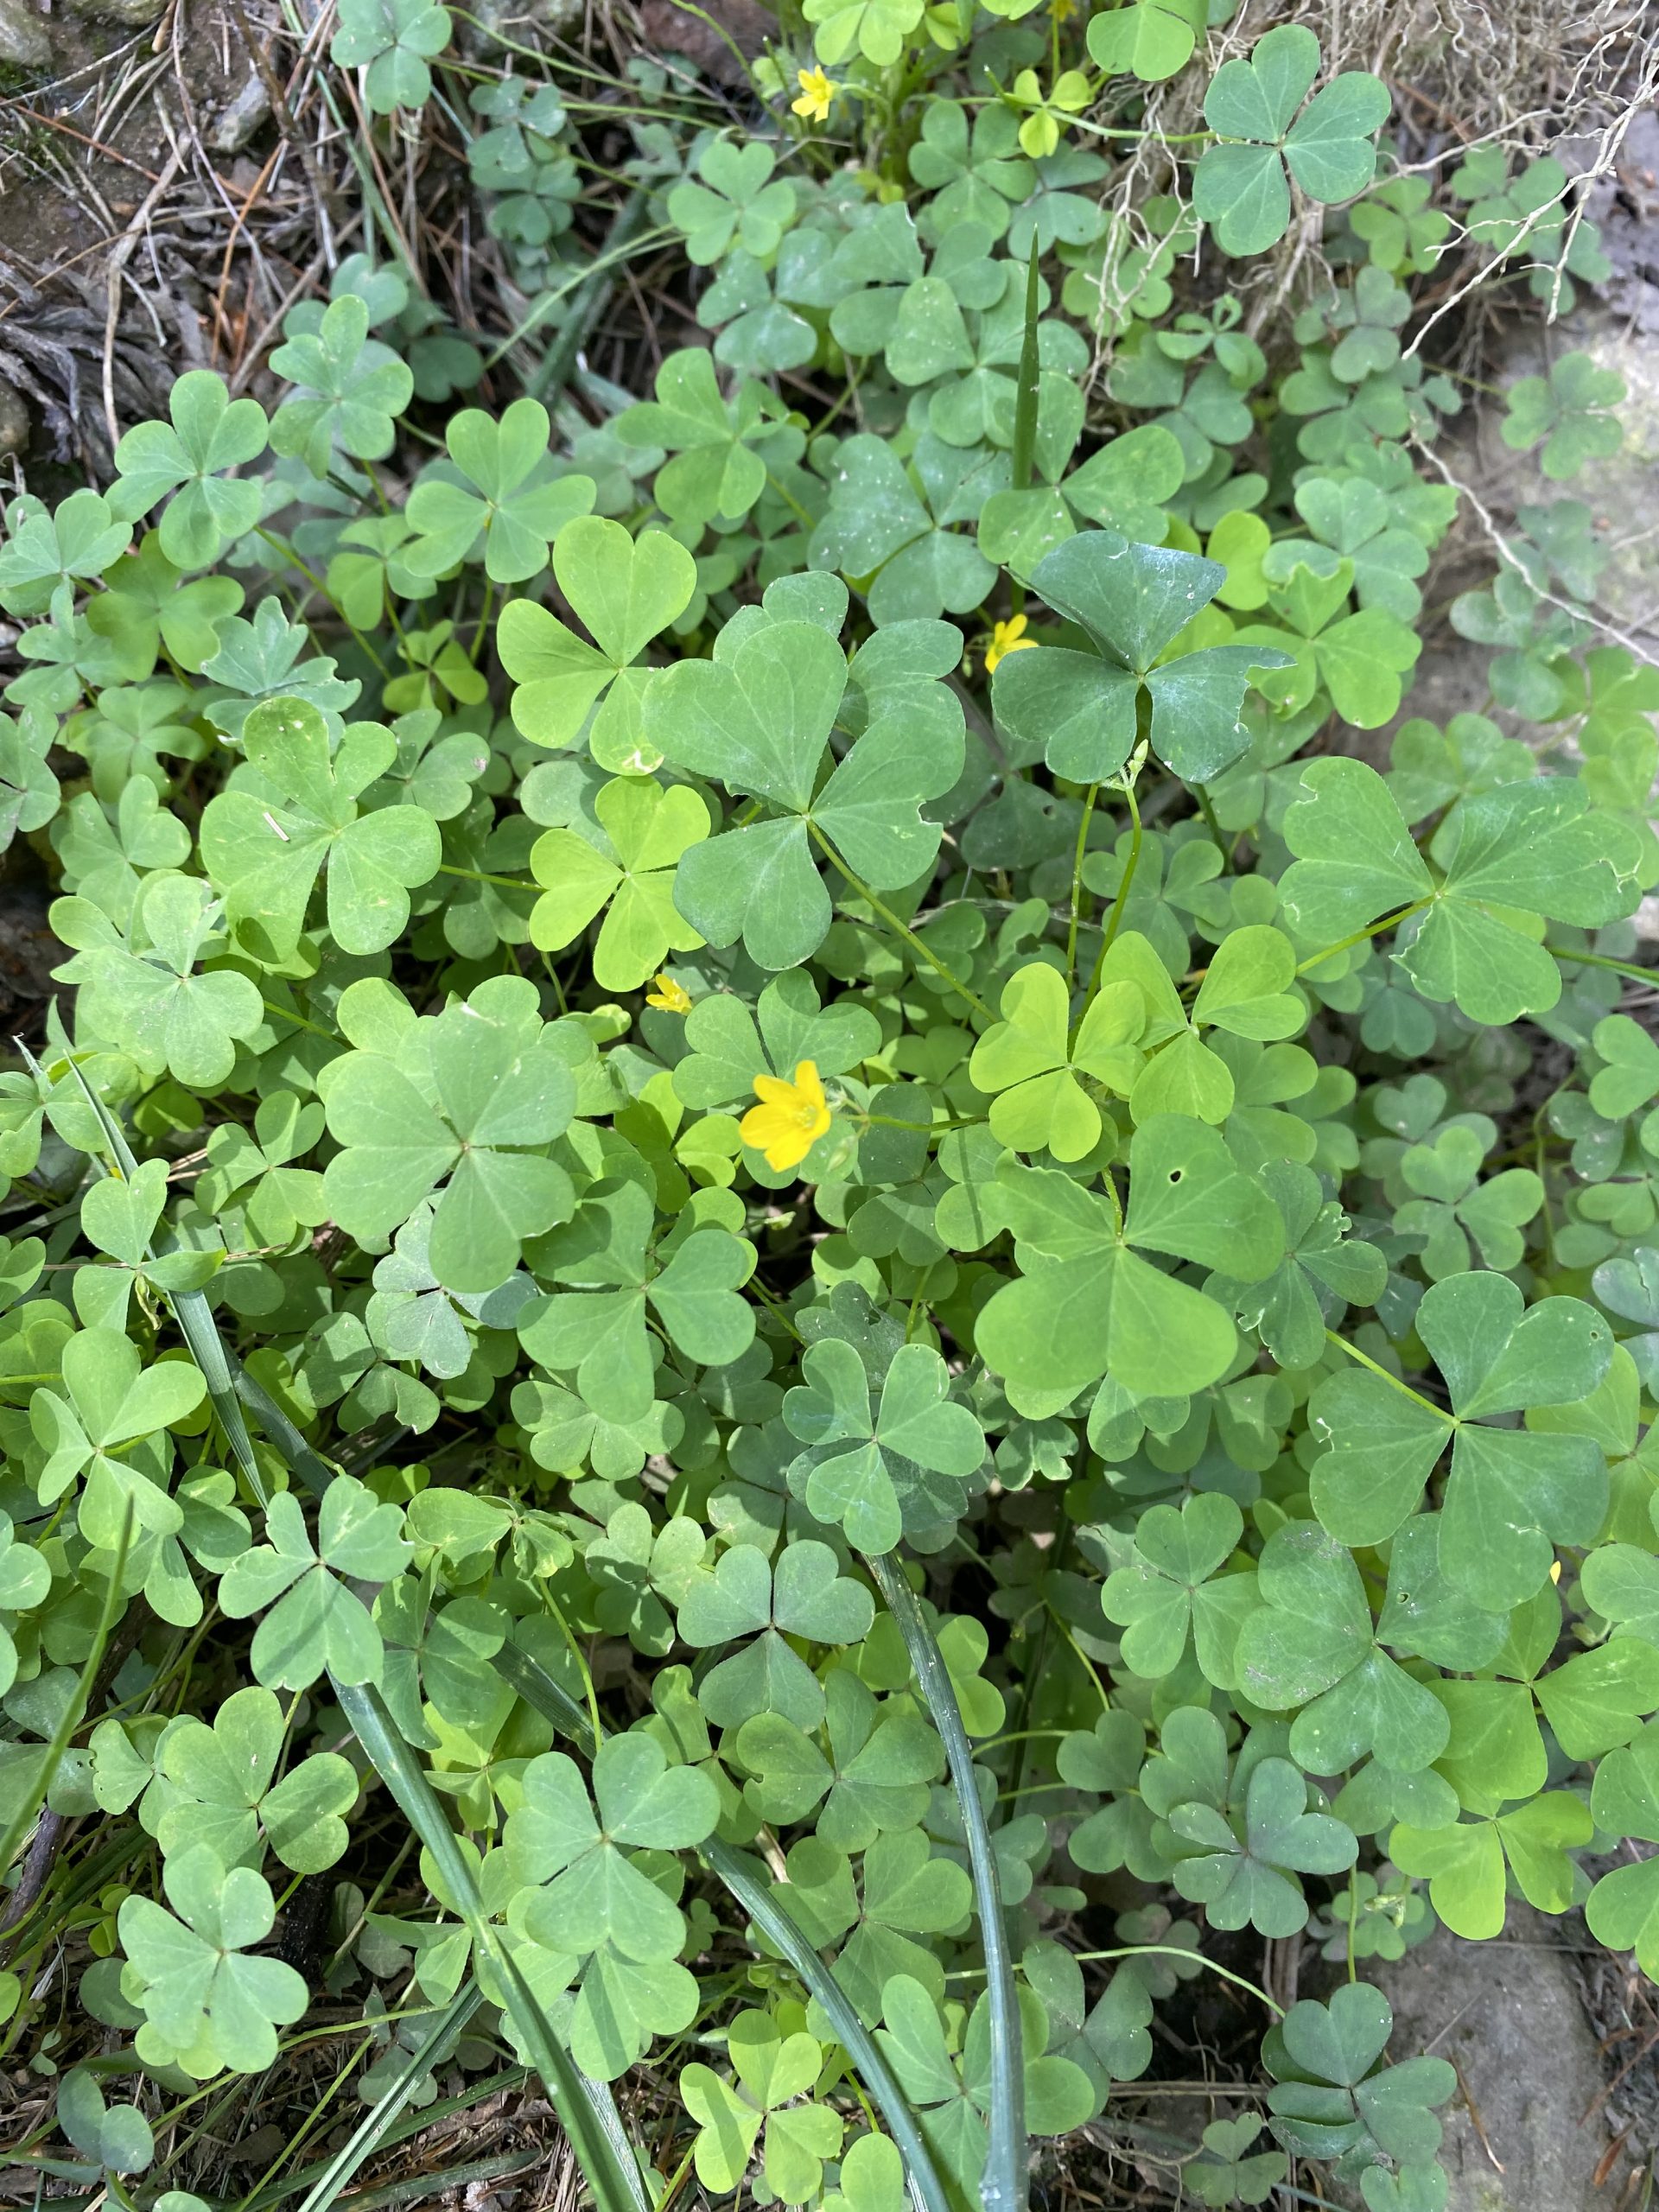 Oxalis clover like lawn weed scaled | 19 common lawn weeds (lawn weeds identification & guide)